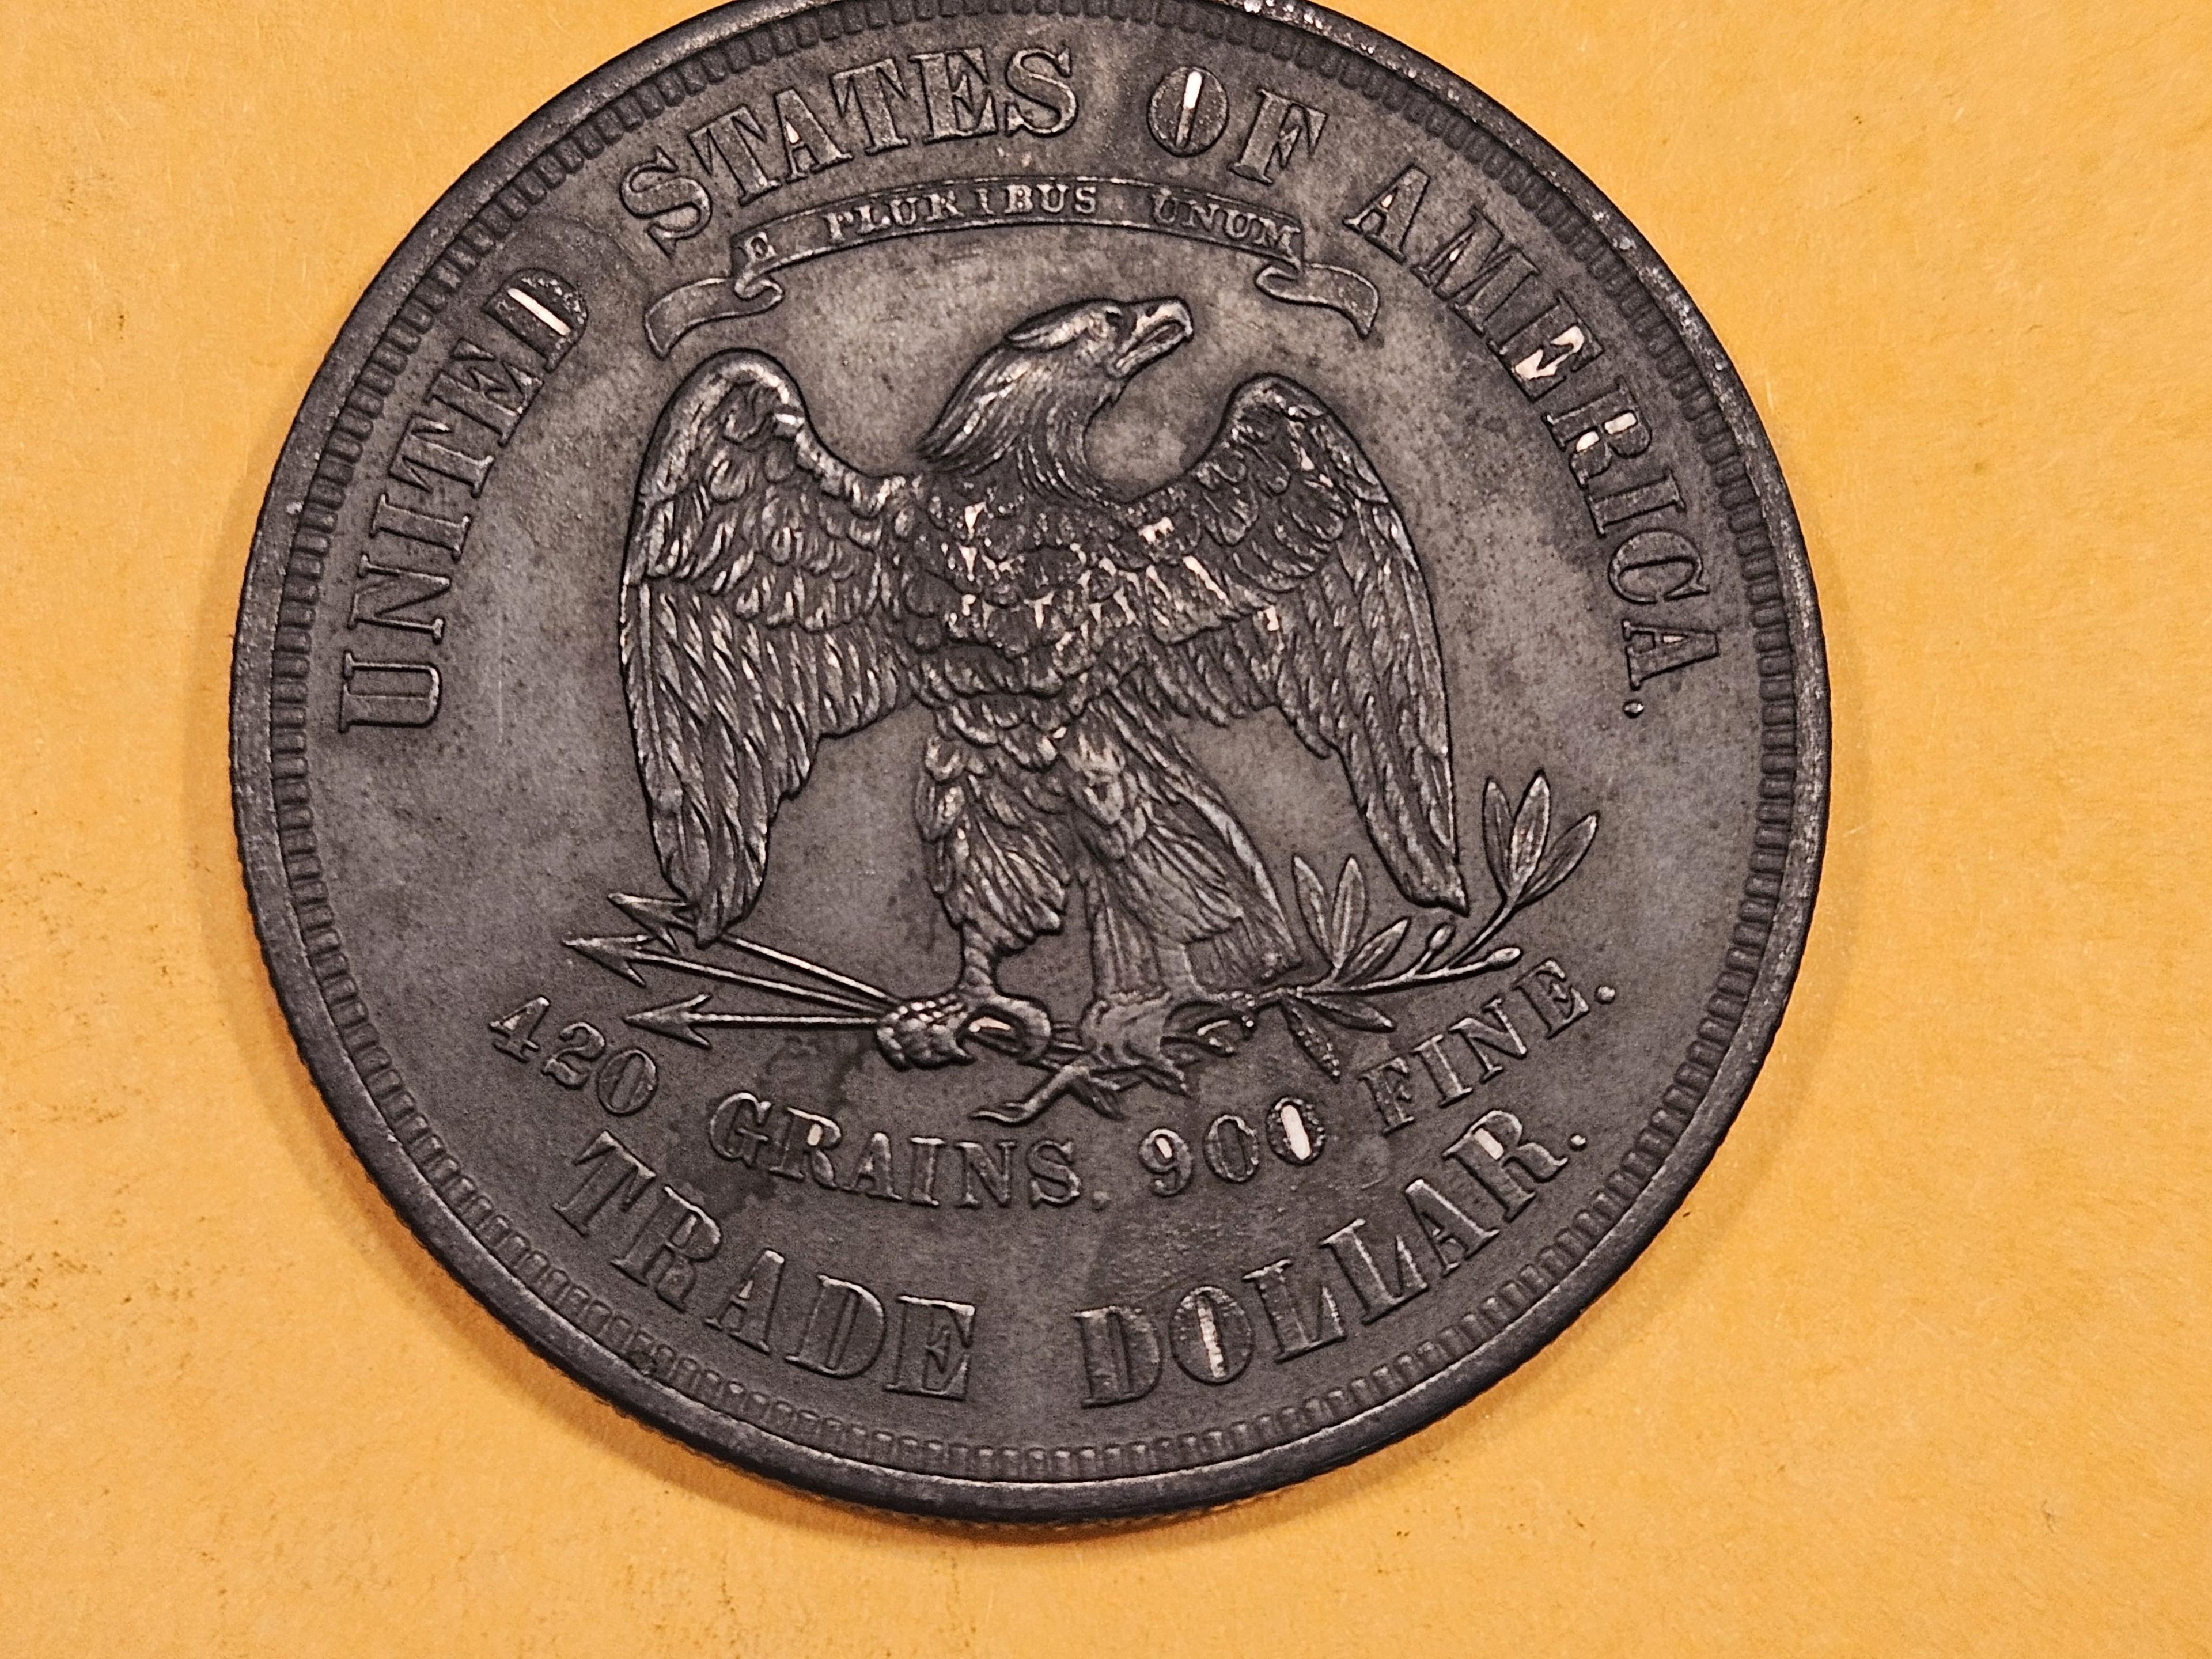 1873 Trade Dollar in Uncirculated - details